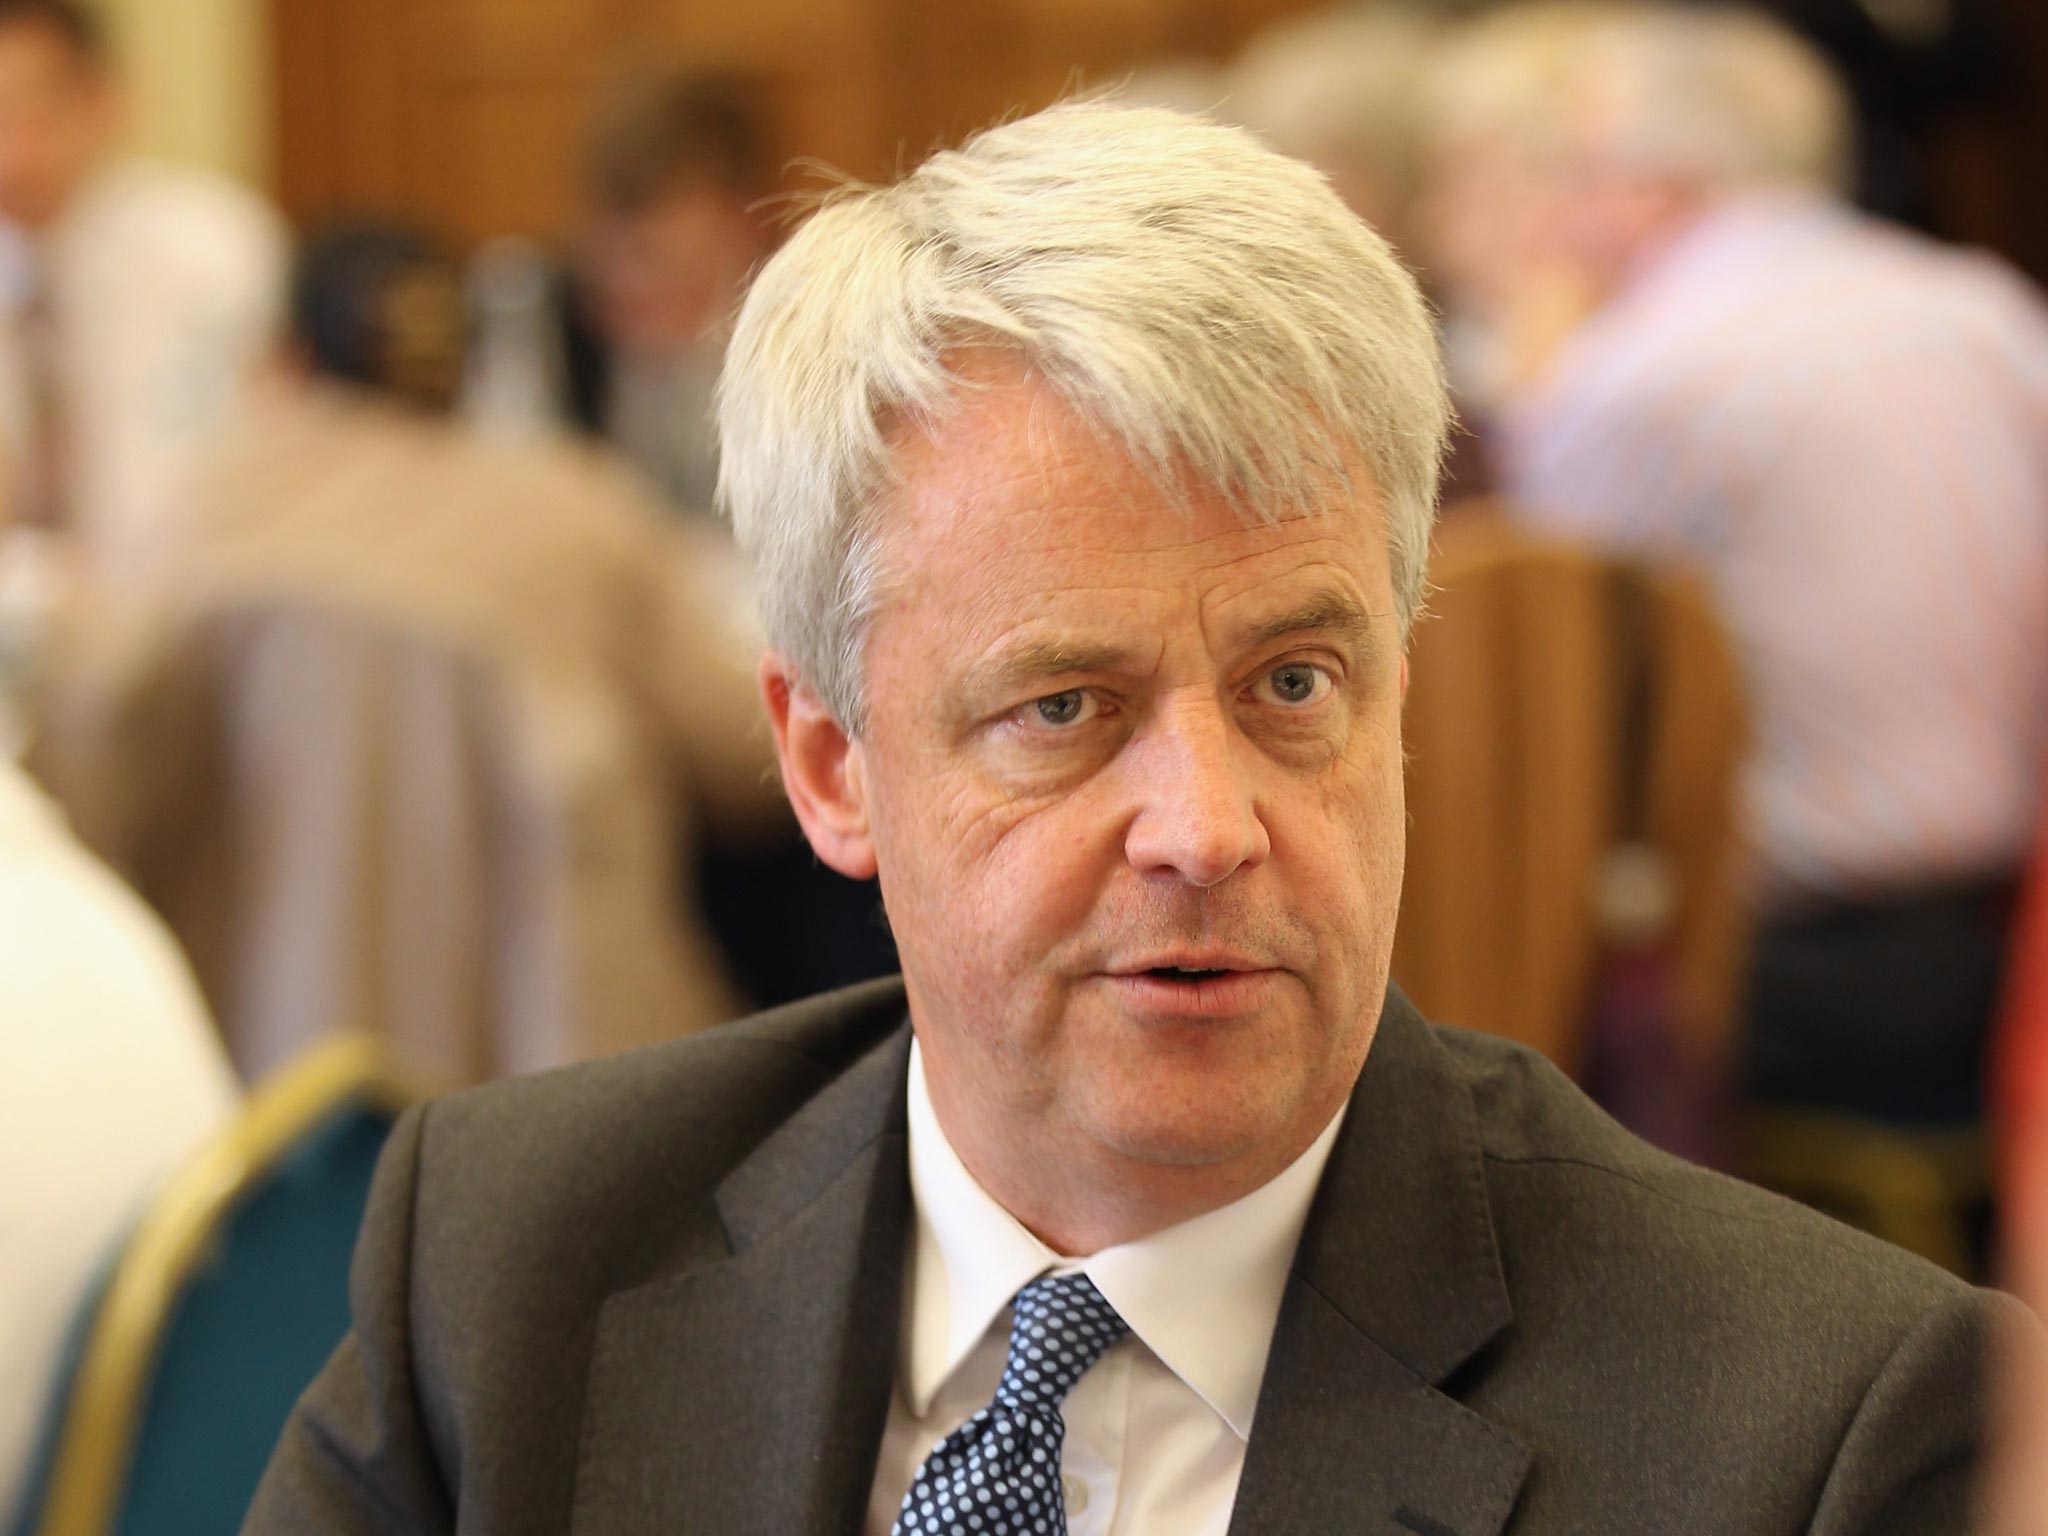 Andrew Lansley would succeed Baroness Ashton, Europe's High Representative for Foreign Affairs